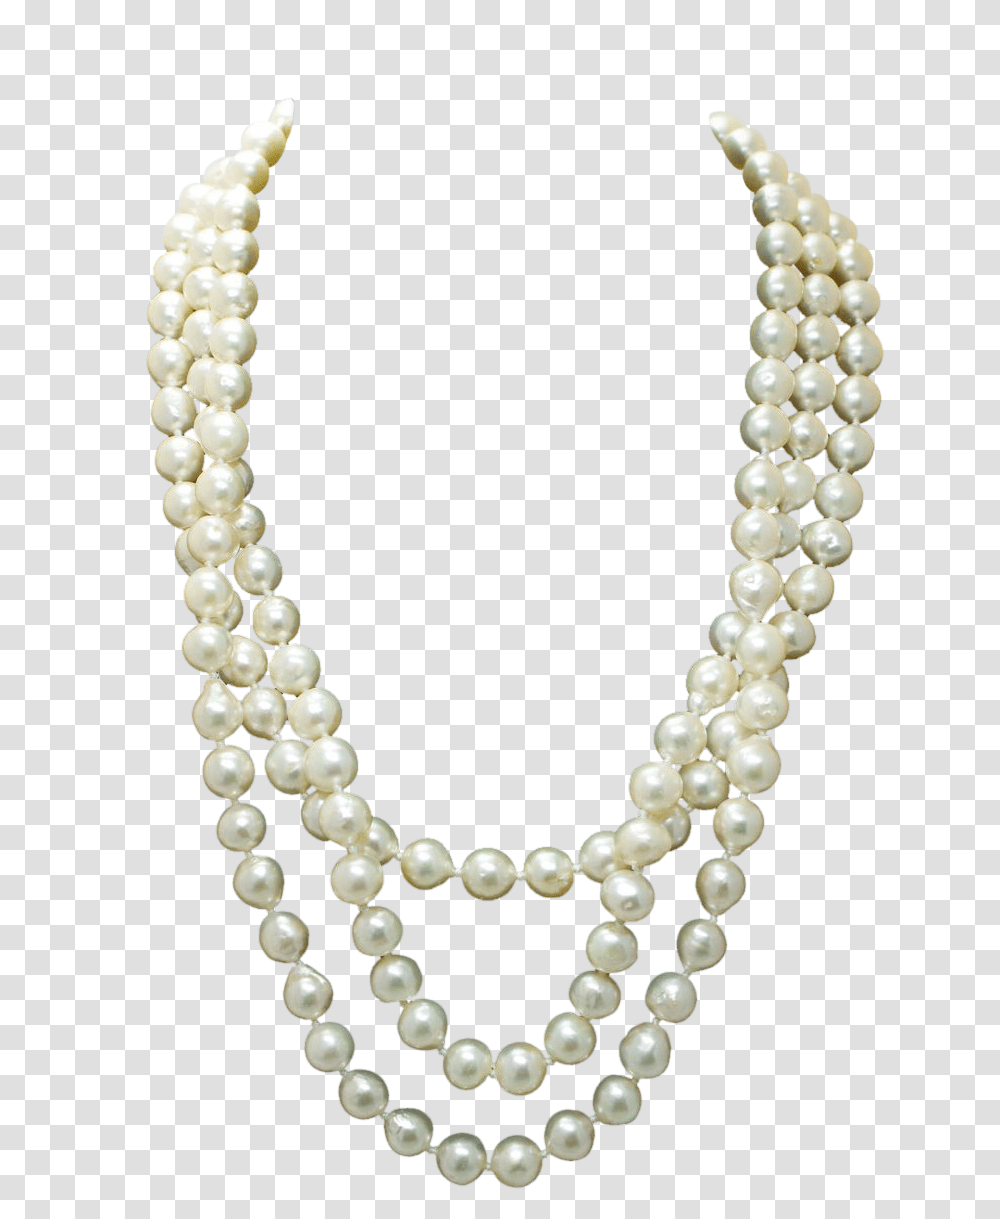 Jewellery Necklace Pearl Necklace Pearl, Bead Necklace, Jewelry, Ornament, Accessories Transparent Png